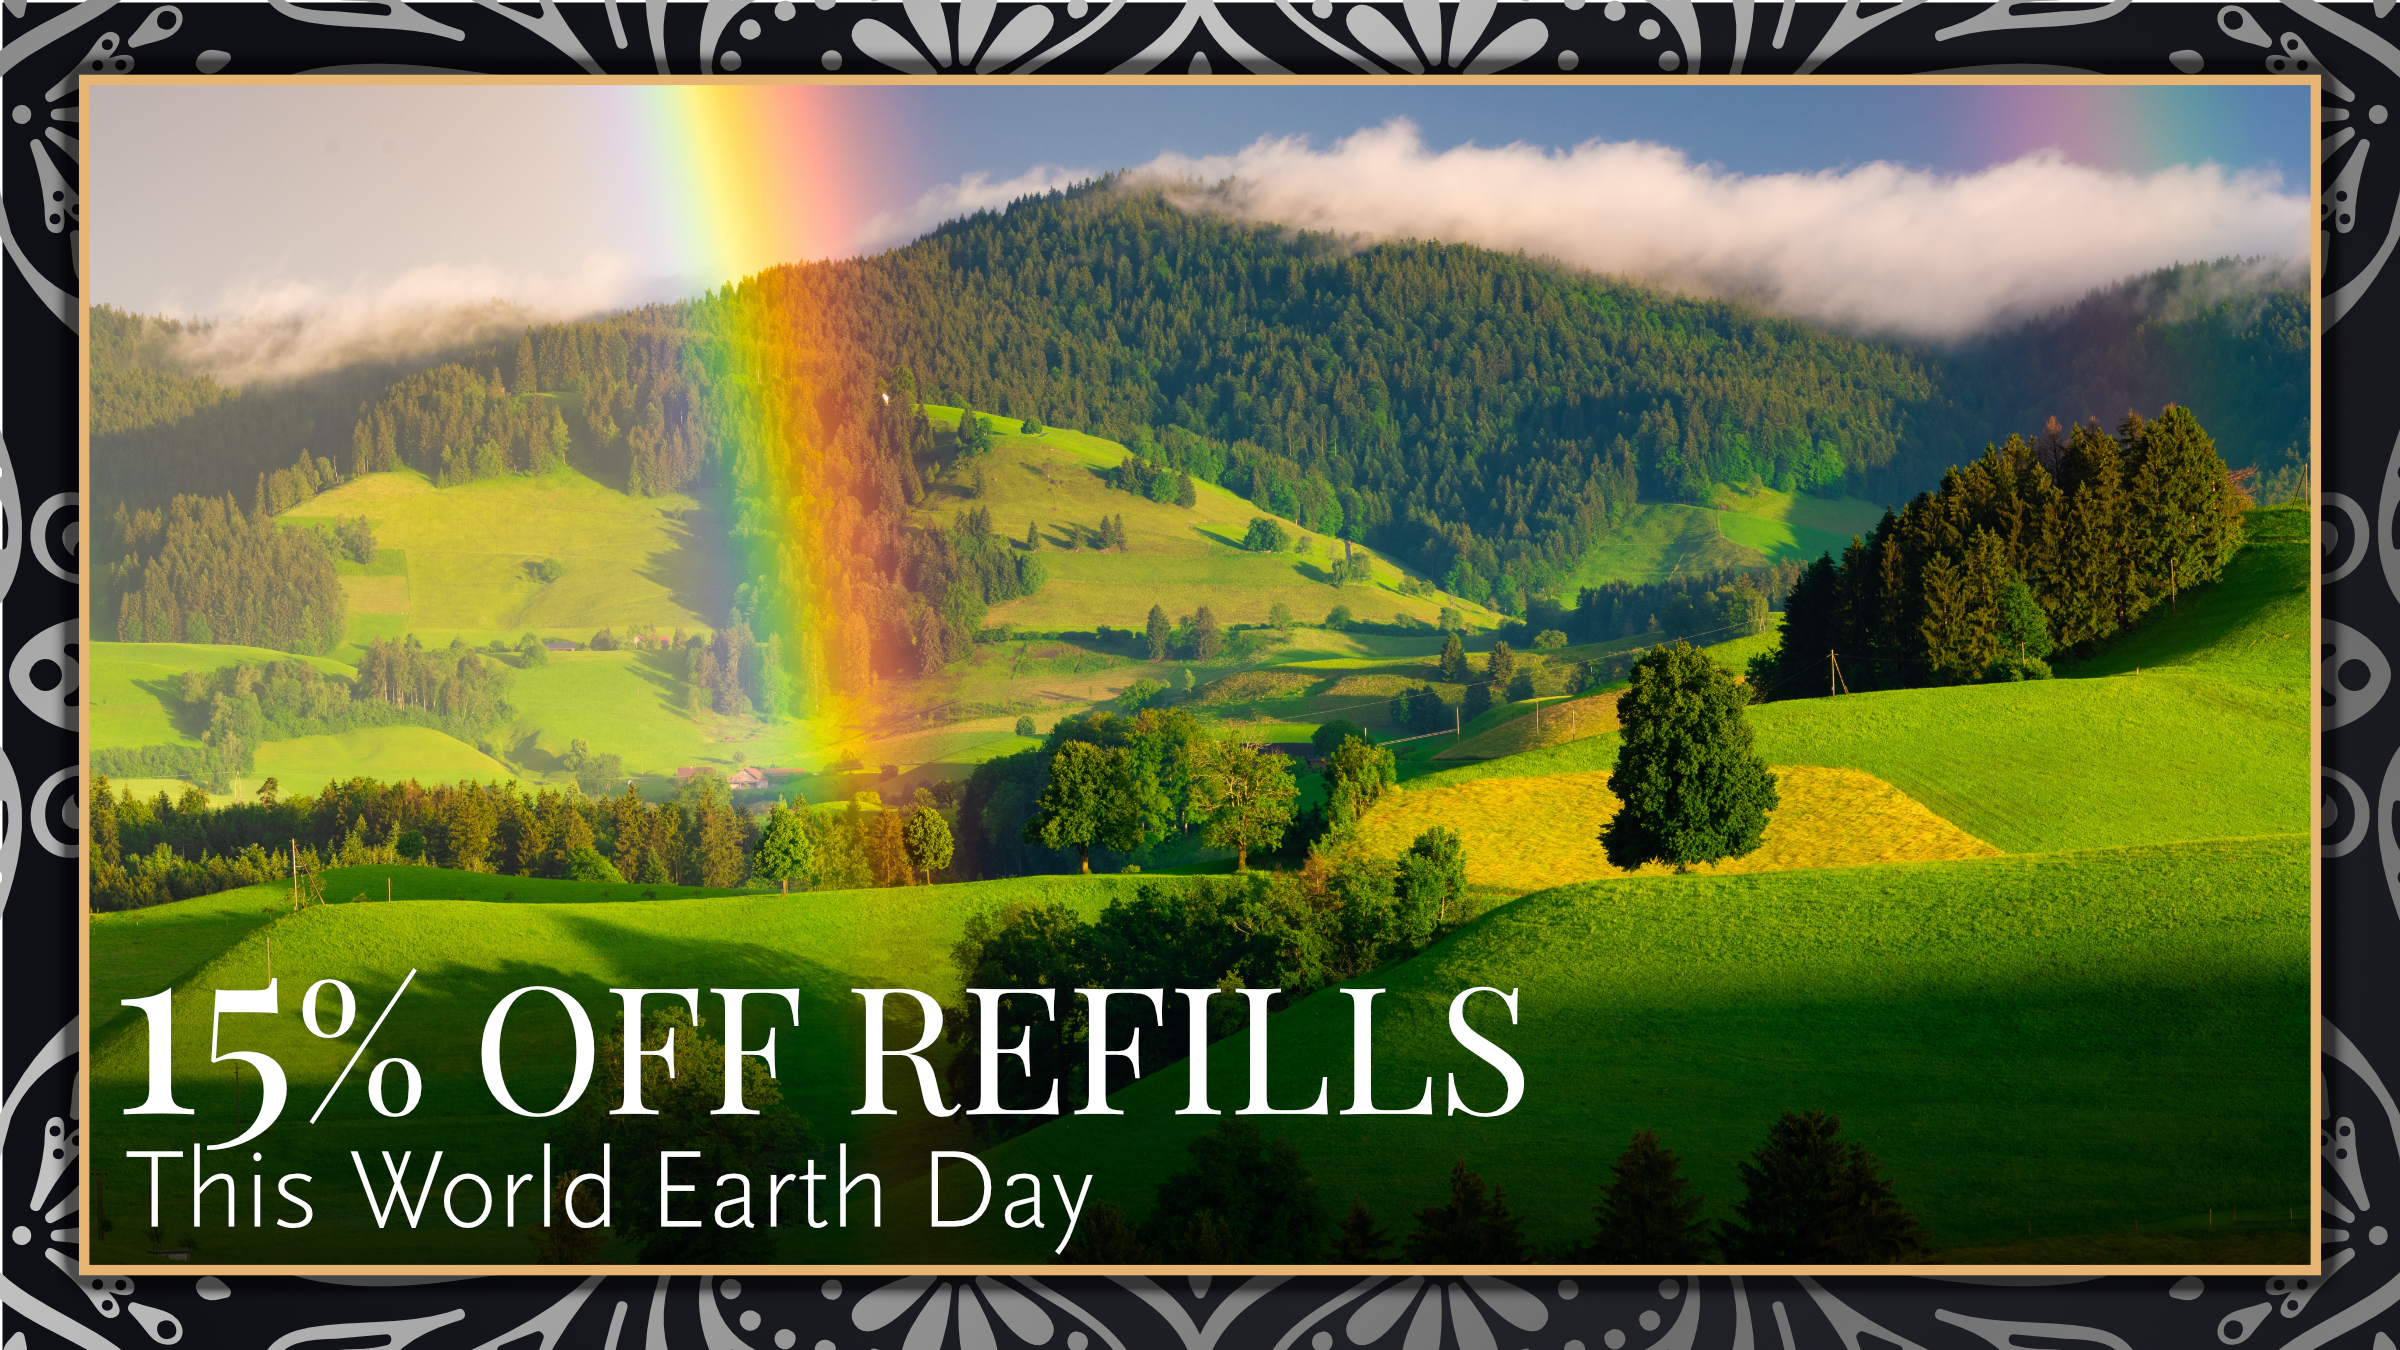 15% off refills for World Earth Day - a photo of a green countryside with a rainbow streaking across